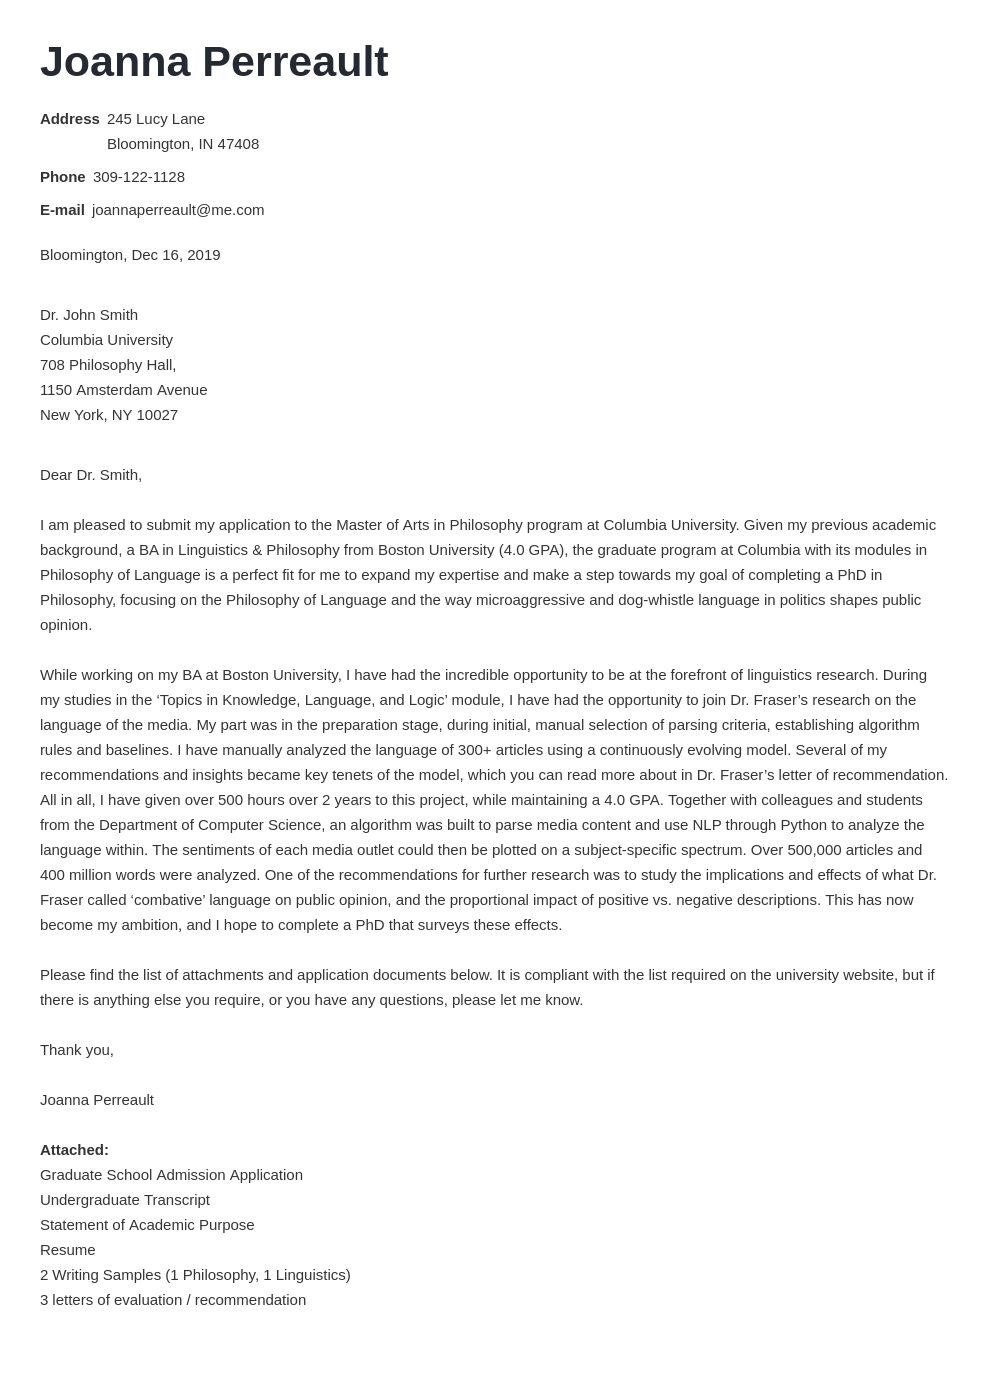 cover letter for application to graduate school